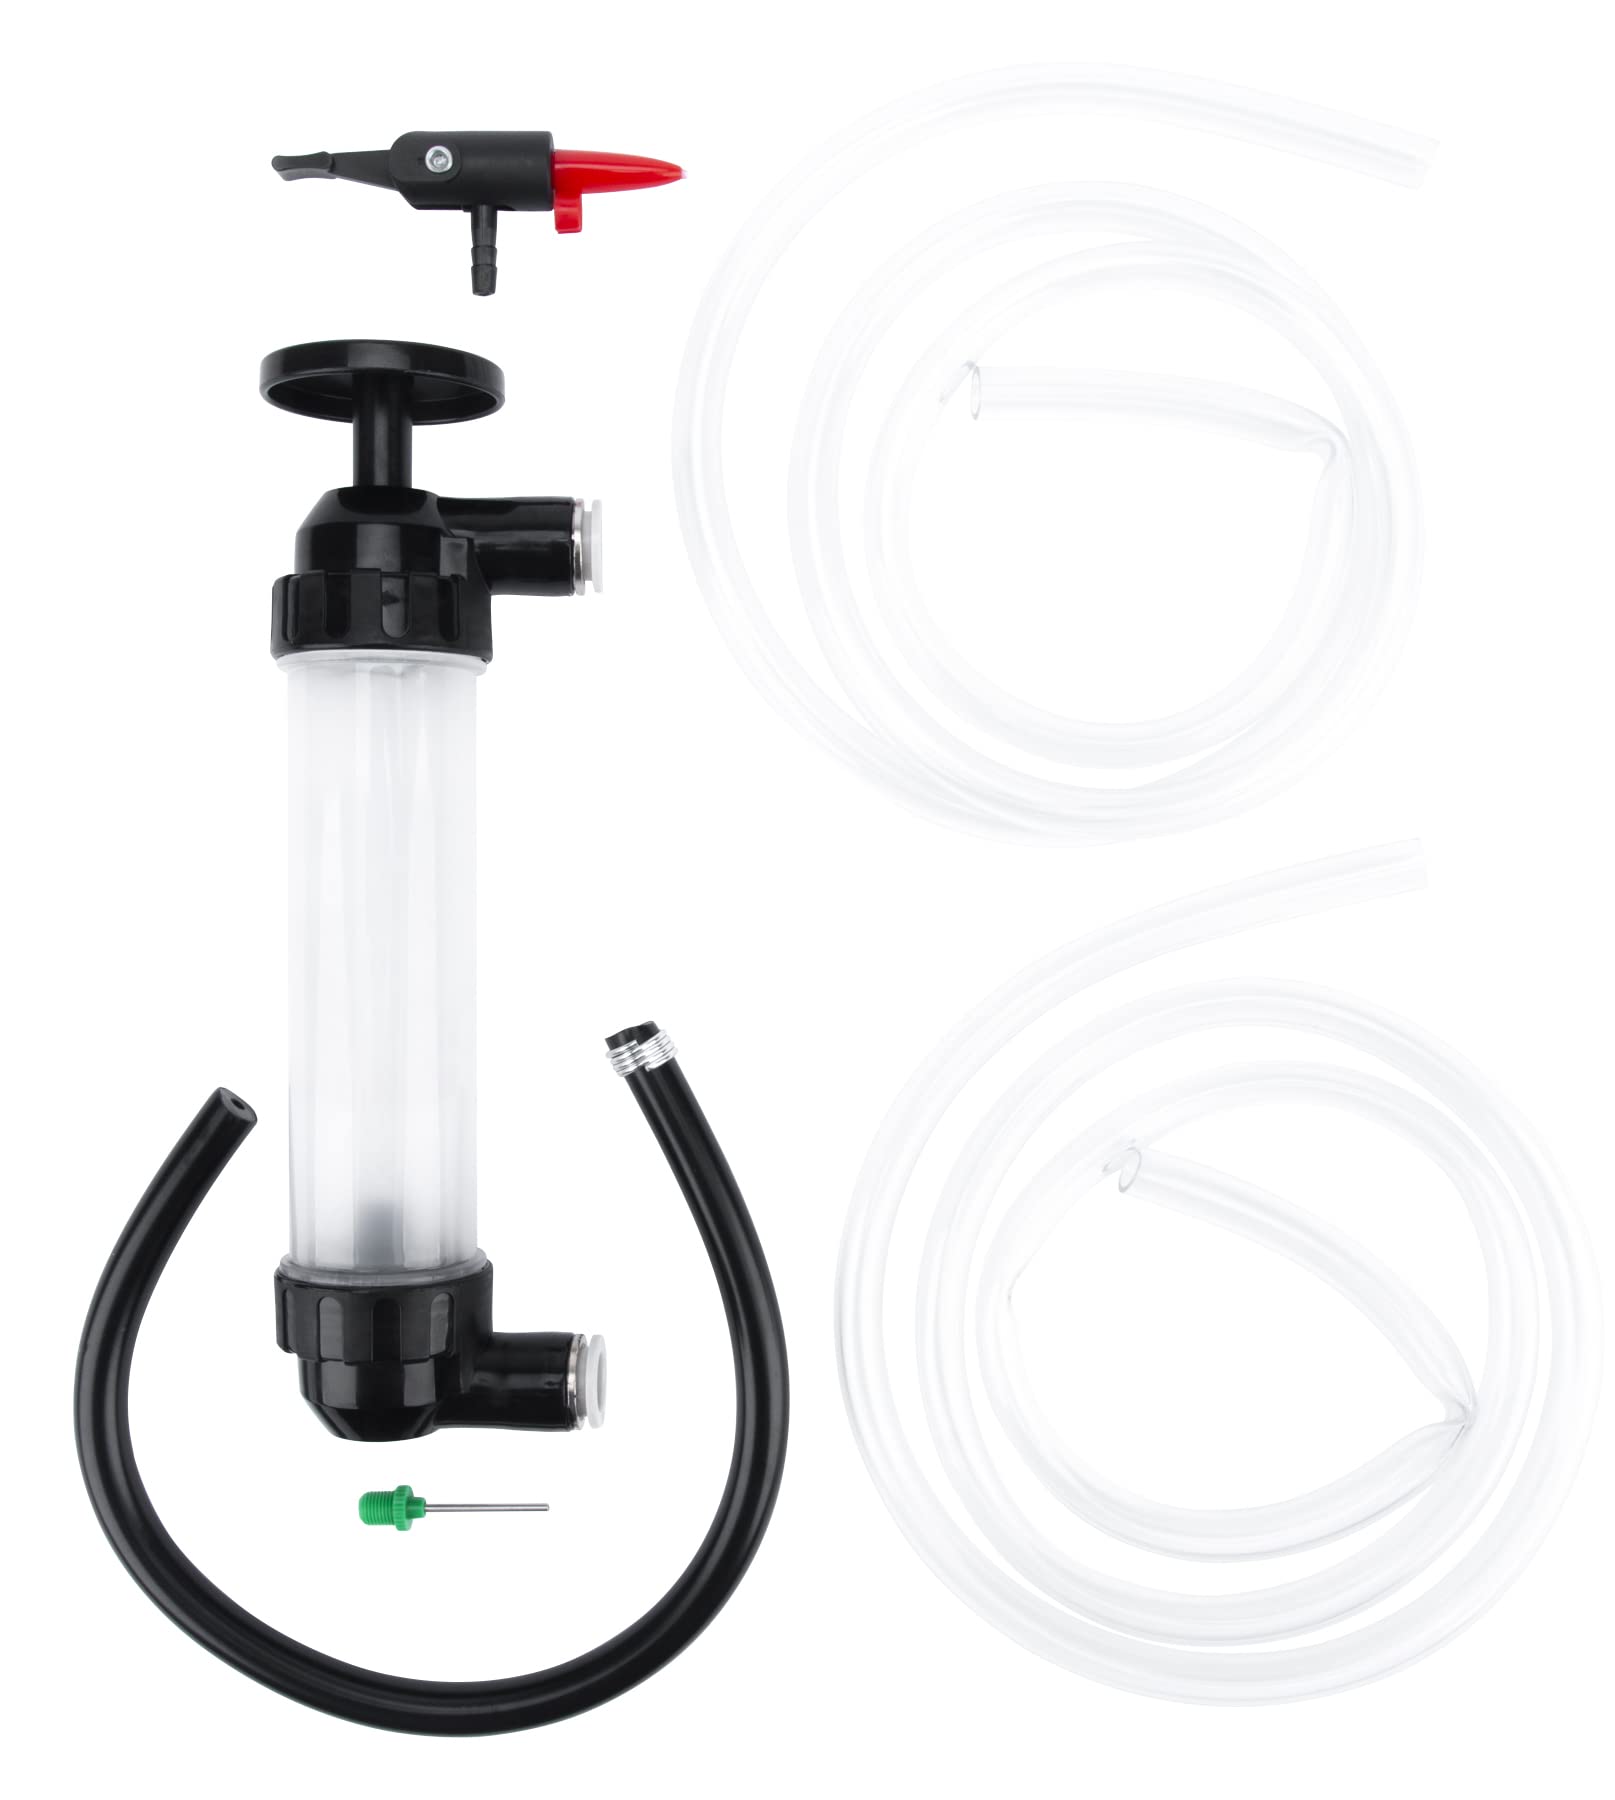 Performance Tool W1156 Grip Clip Siphon Fluid Transfer Pump Kit for Water, Oil, Liquid, and Air von PERFORMANCE TOOL